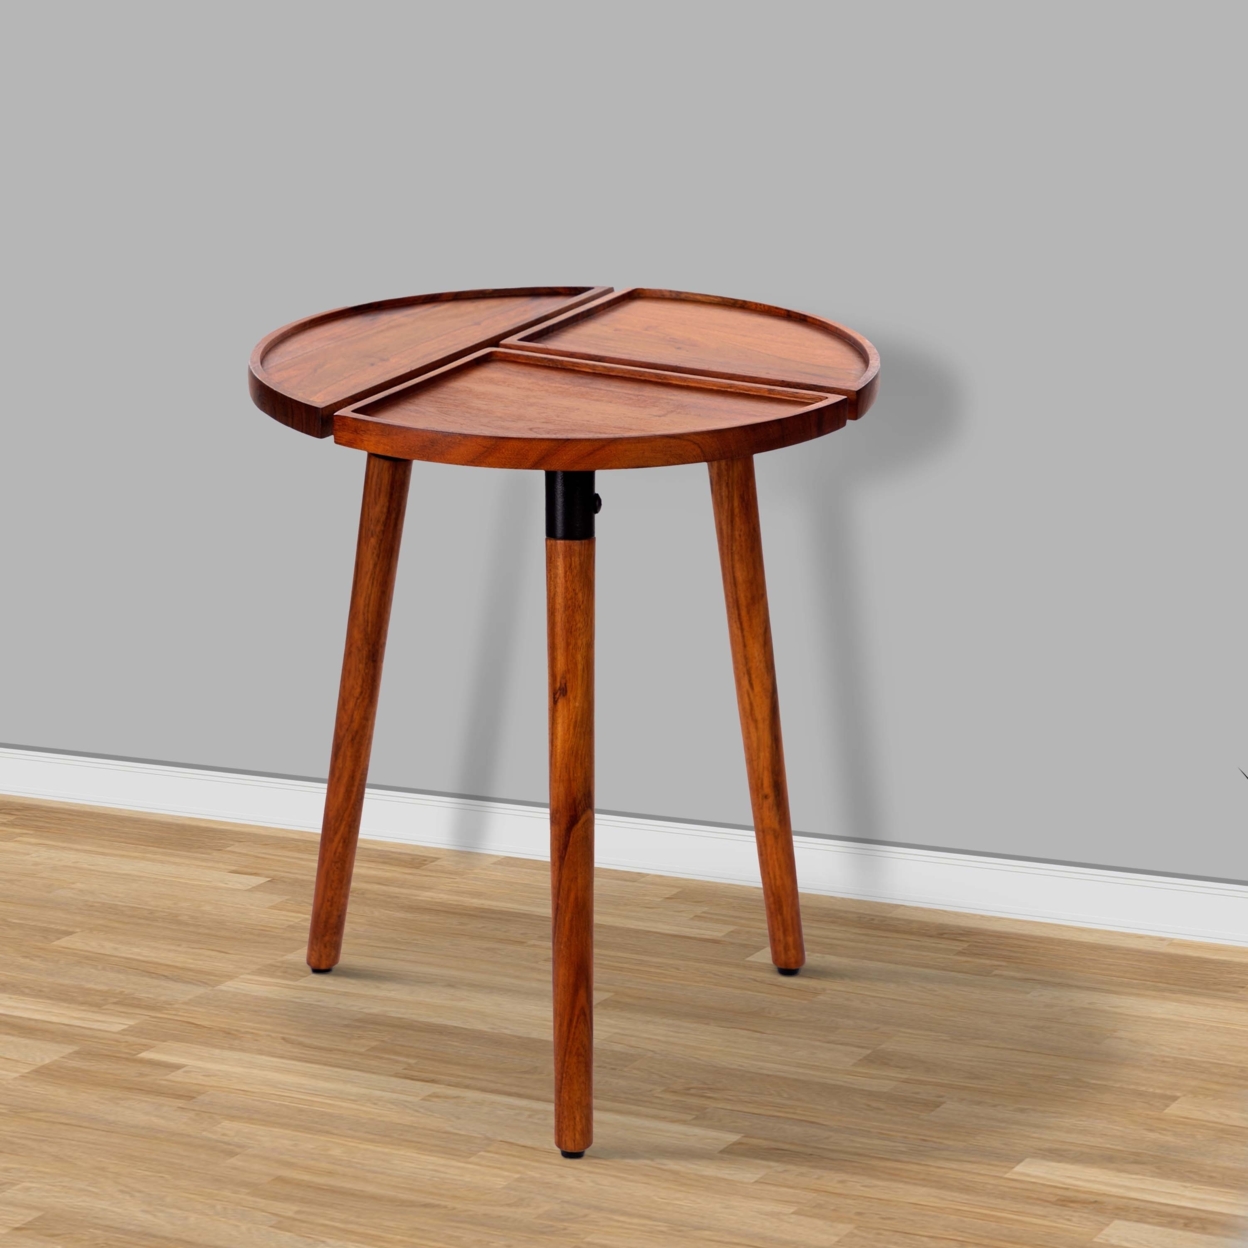 18 Inch Round Acacia Wood Side Accent End Table With 3 Tabletop Sections, Warm Brown- Saltoro Sherpi